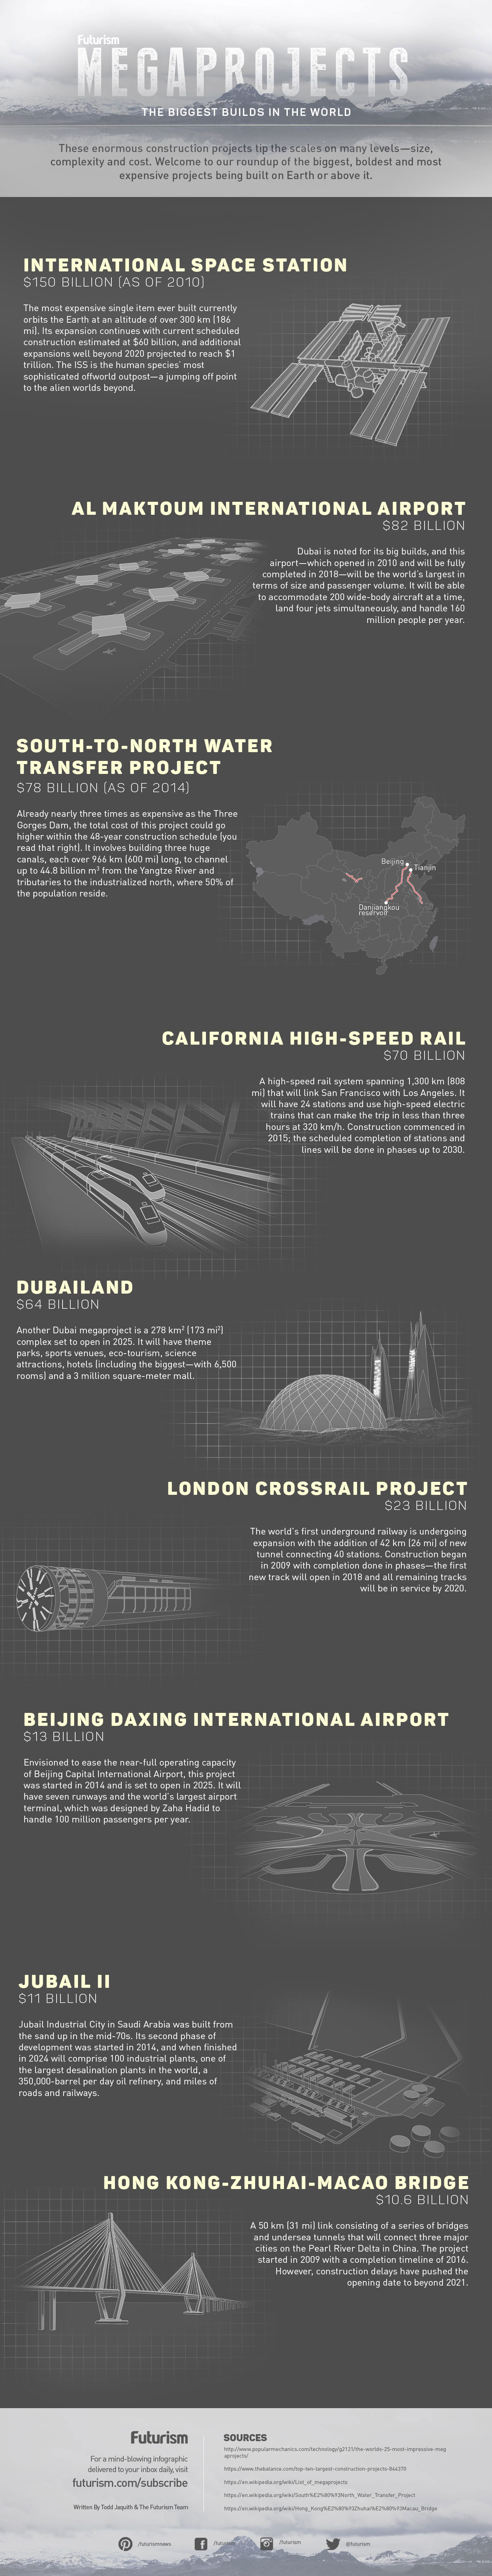 The World's Largest Megaprojects